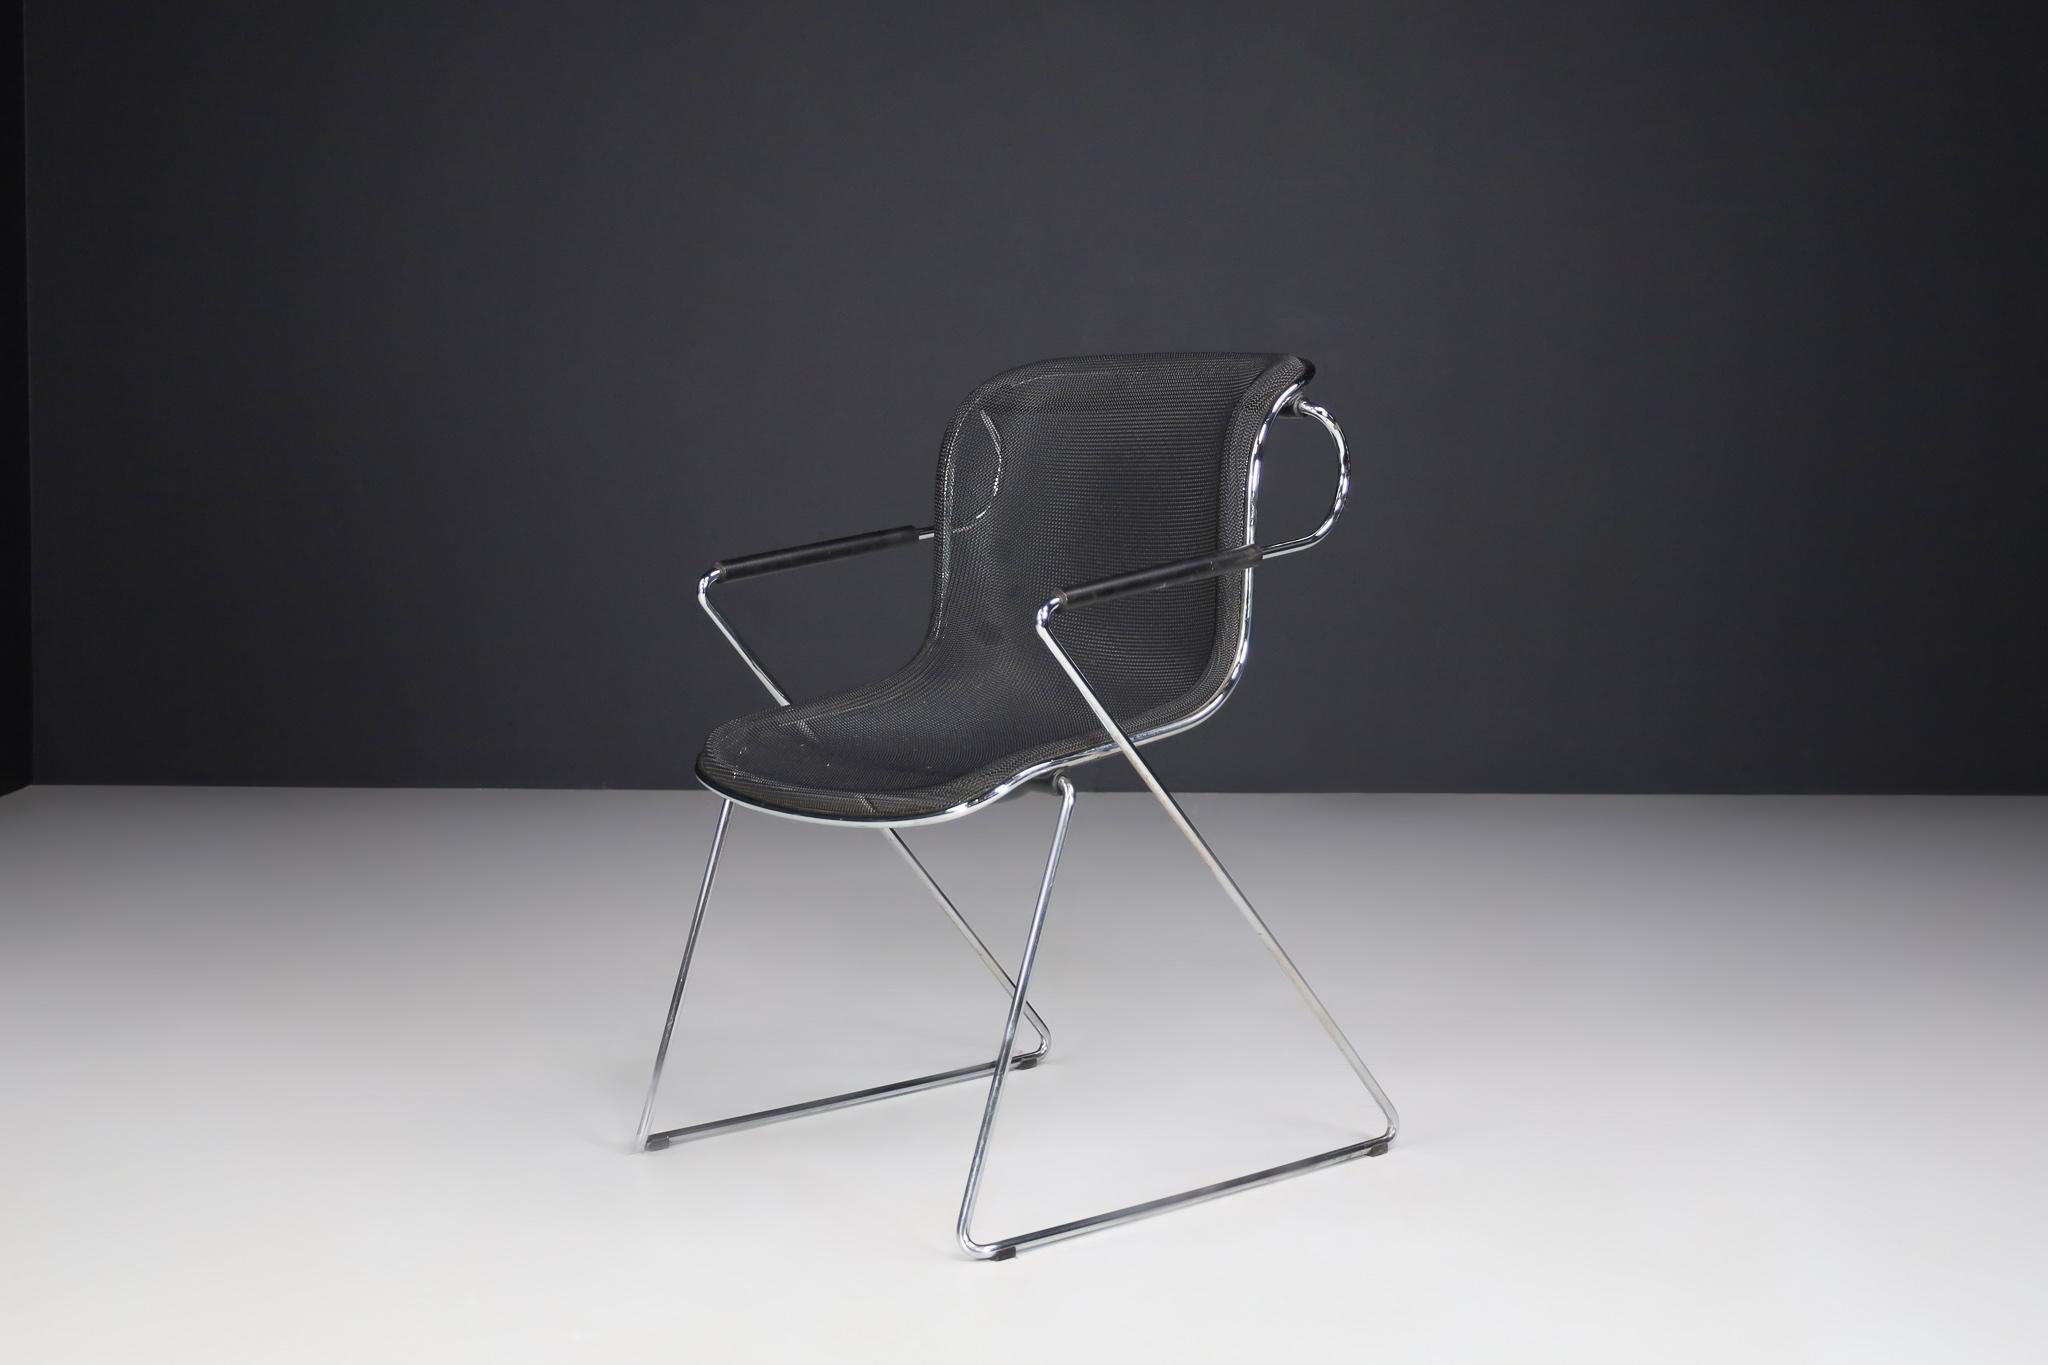 This Penelope armchair was designed in 1982 by Charles Pollock and produced by Castelli in Italy. The frame of this chair is made of chrome-plated steel wire. Pollock chose fine black coated wire mesh as the material for the seat shell.

About the